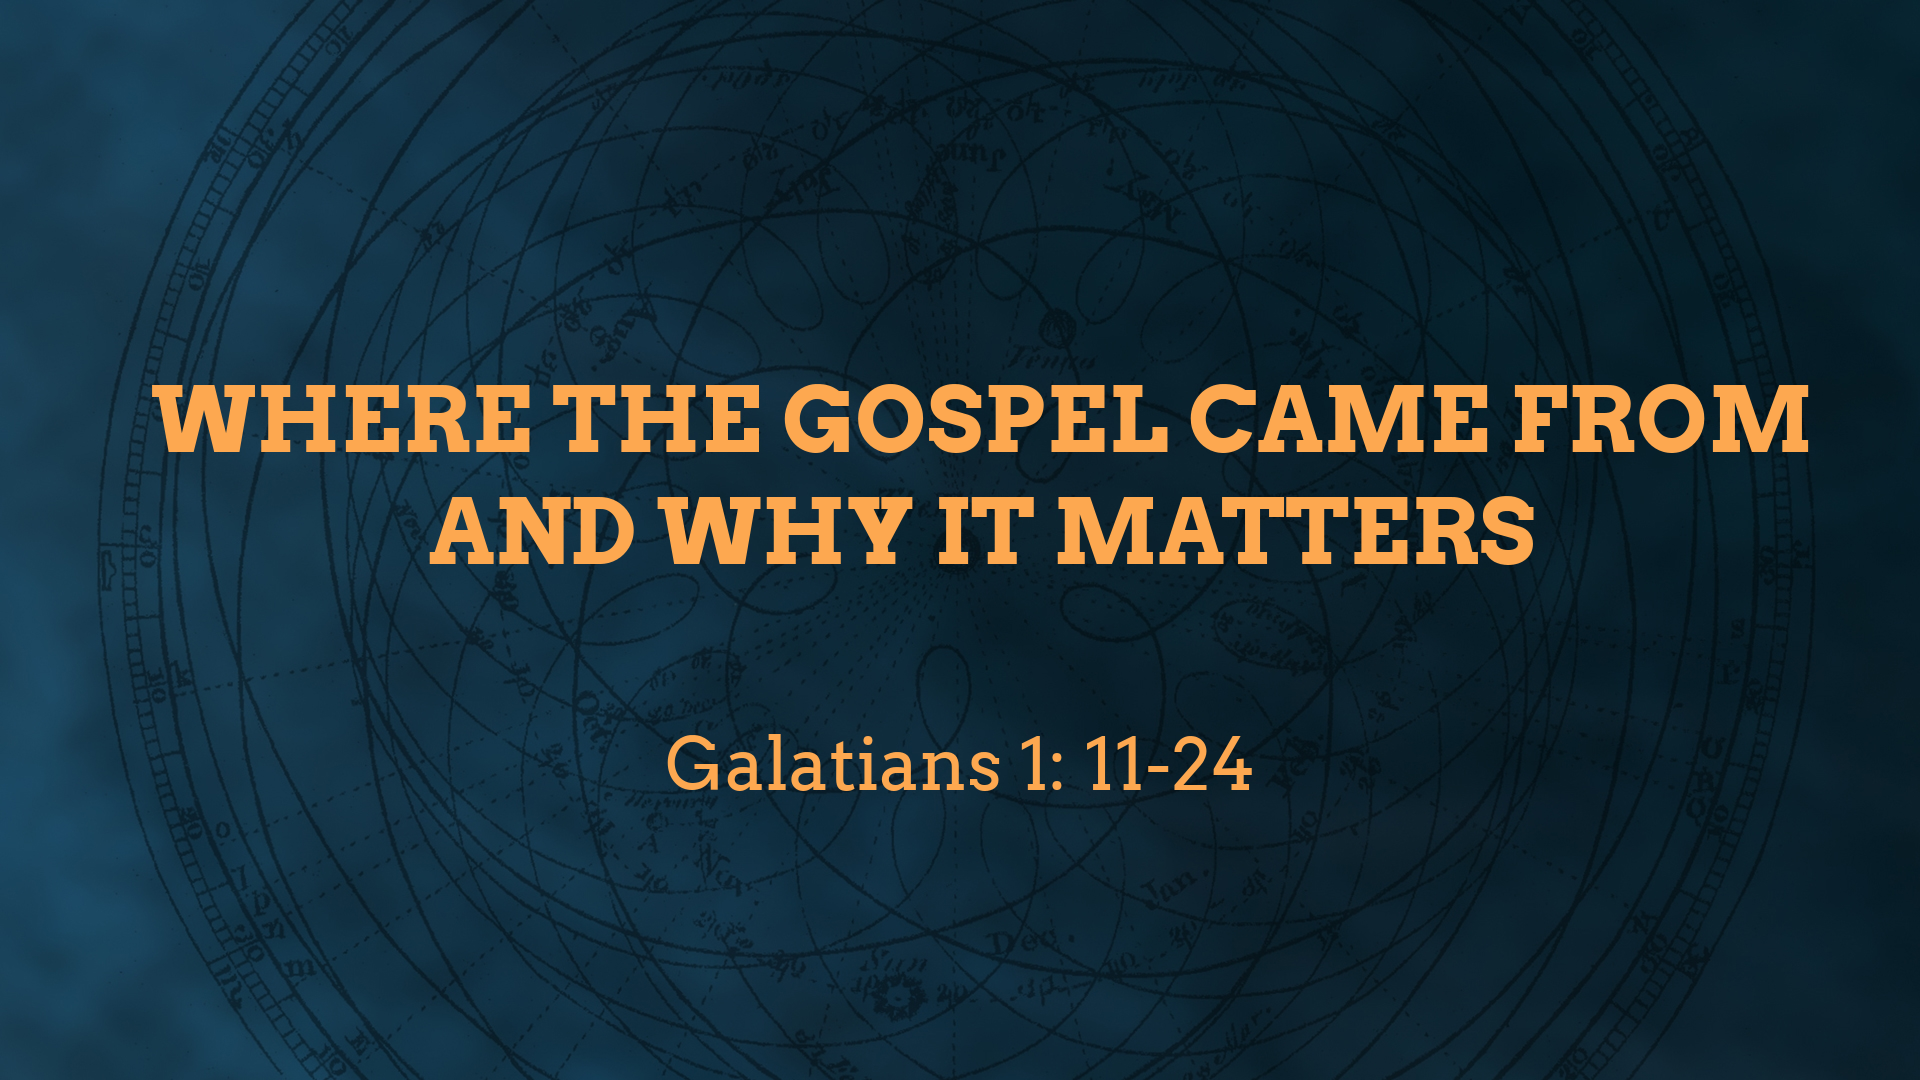 Sep 05, 2021 - Where the Gospel Came From and Why It Matters  (Video) - Galatians 1: 11 - 24